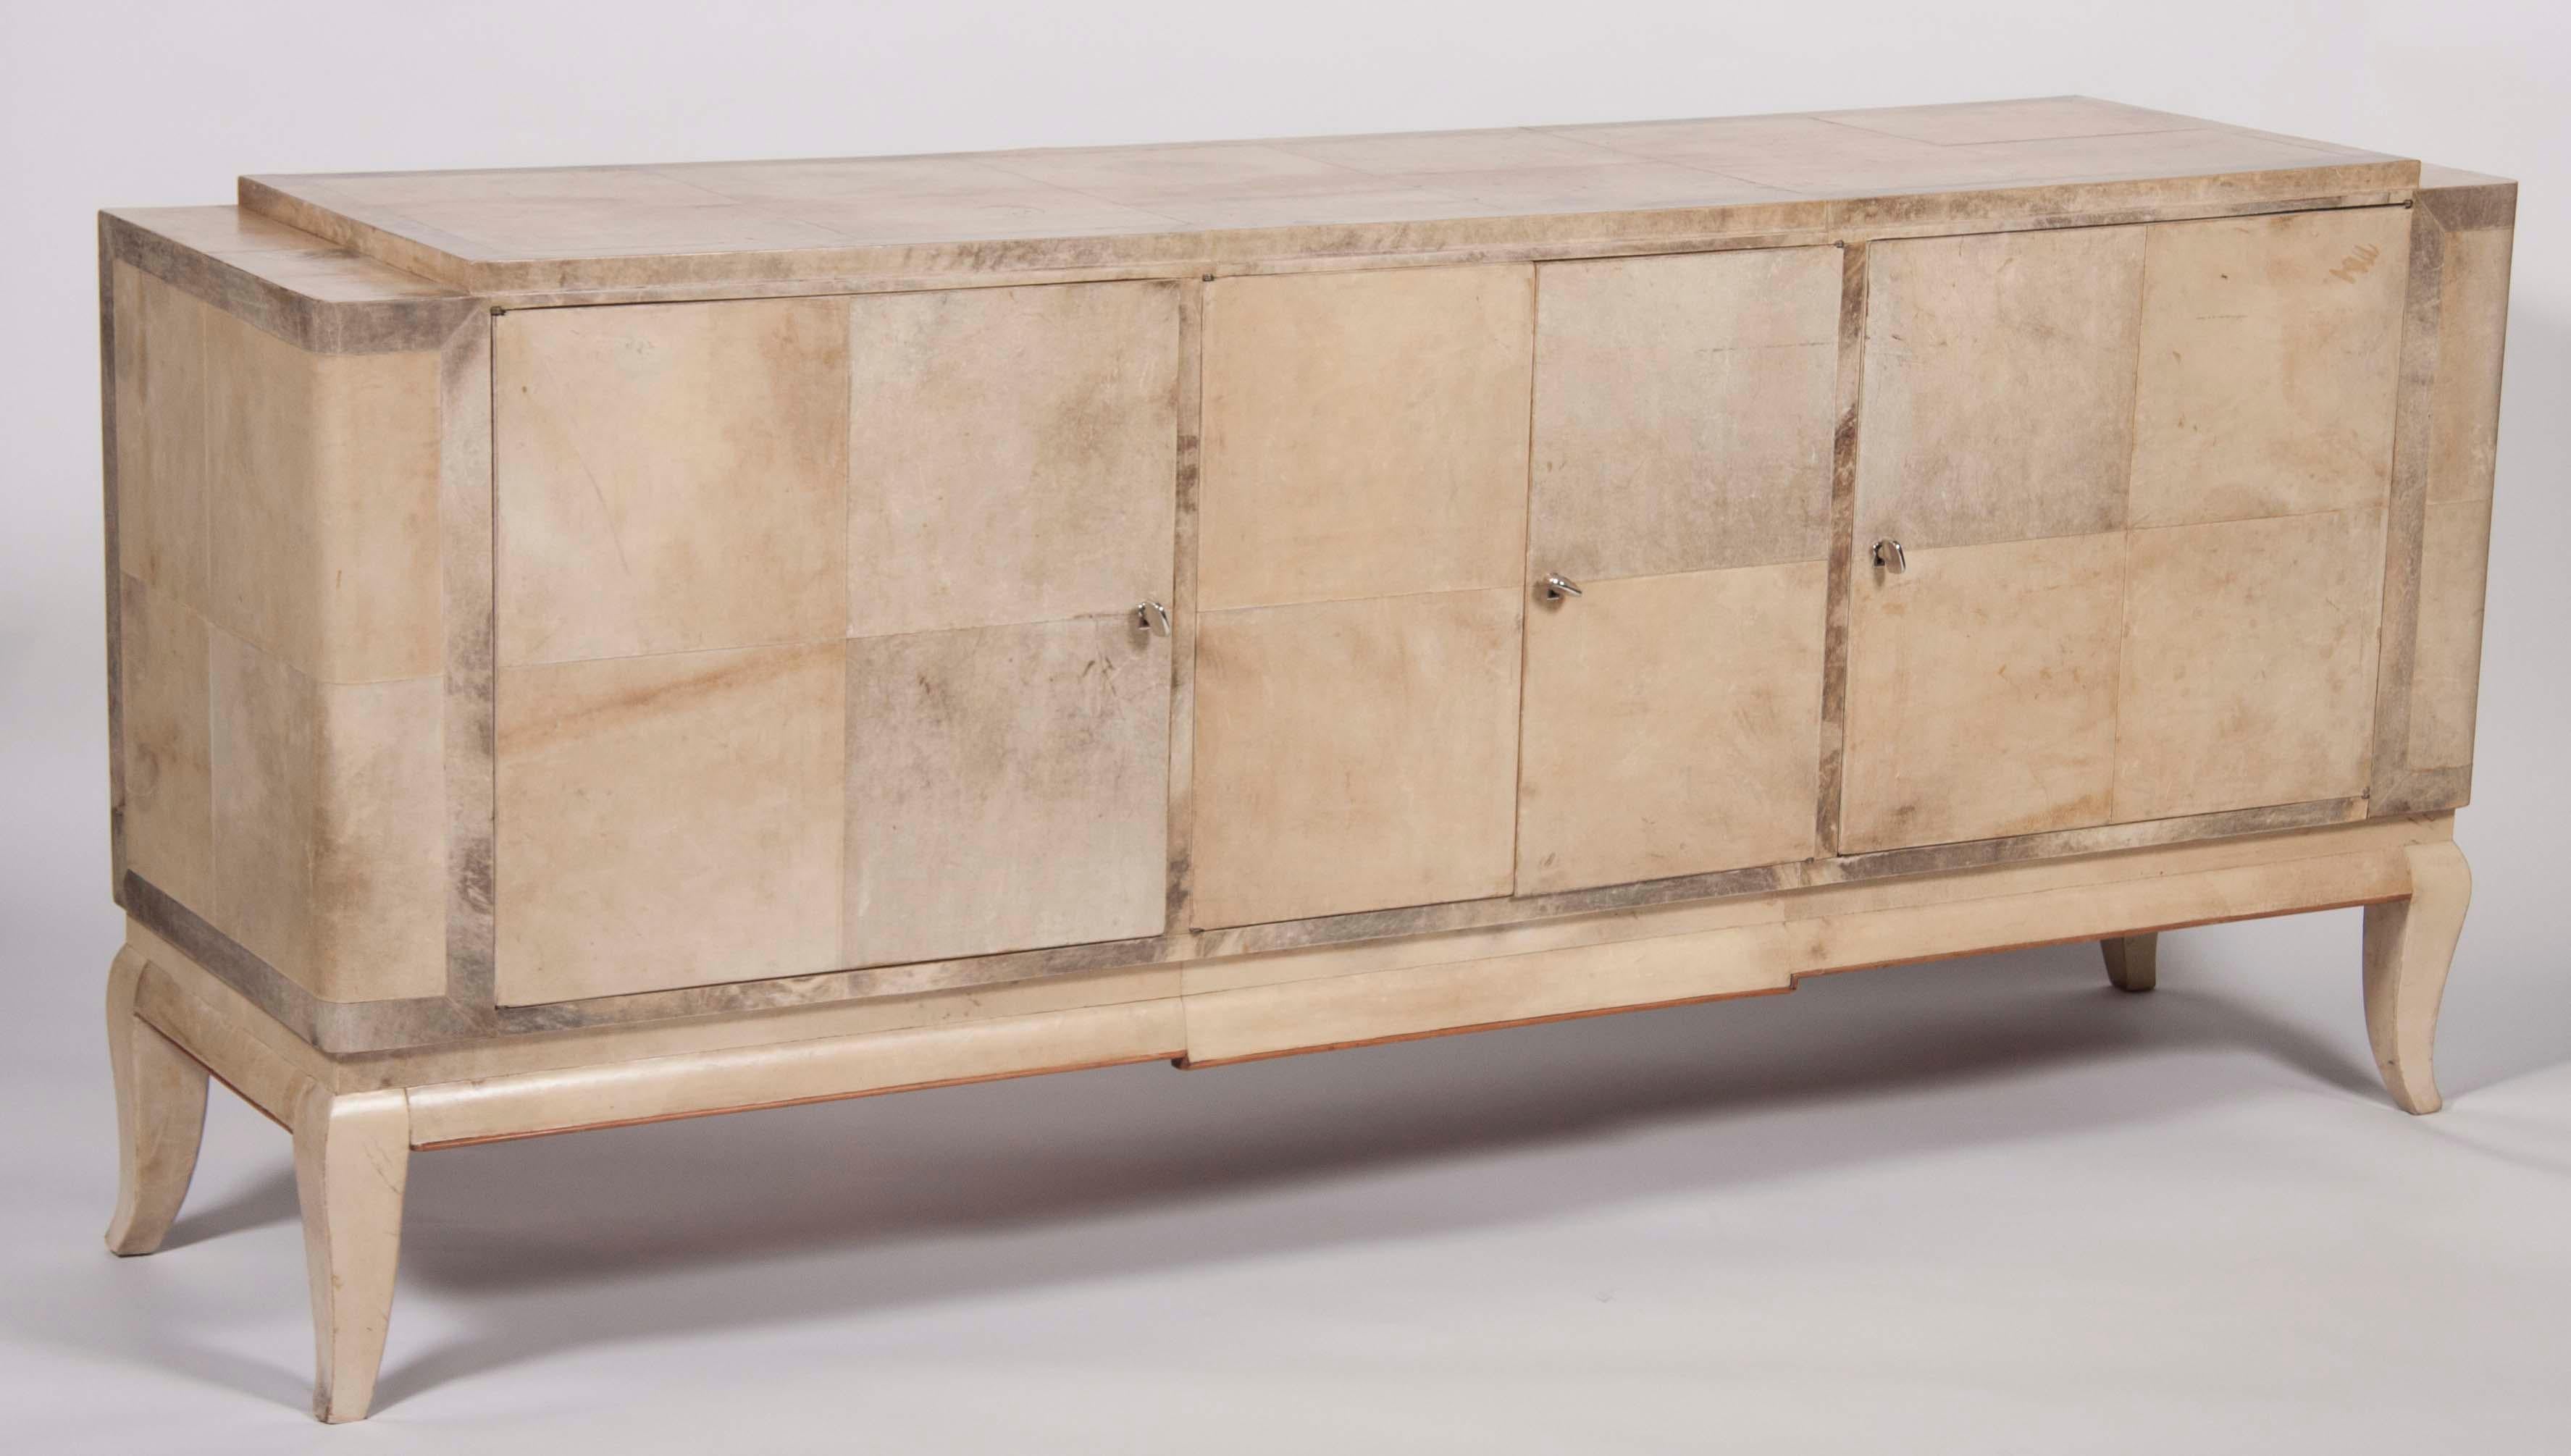 A stunning 1940s credenza covered in parchment, with thin fruitwood molding along the base. Very much in the style of, and possibly created by the American designer Samuel Marx. The variegated shades of the parchment give this piece a distinct and